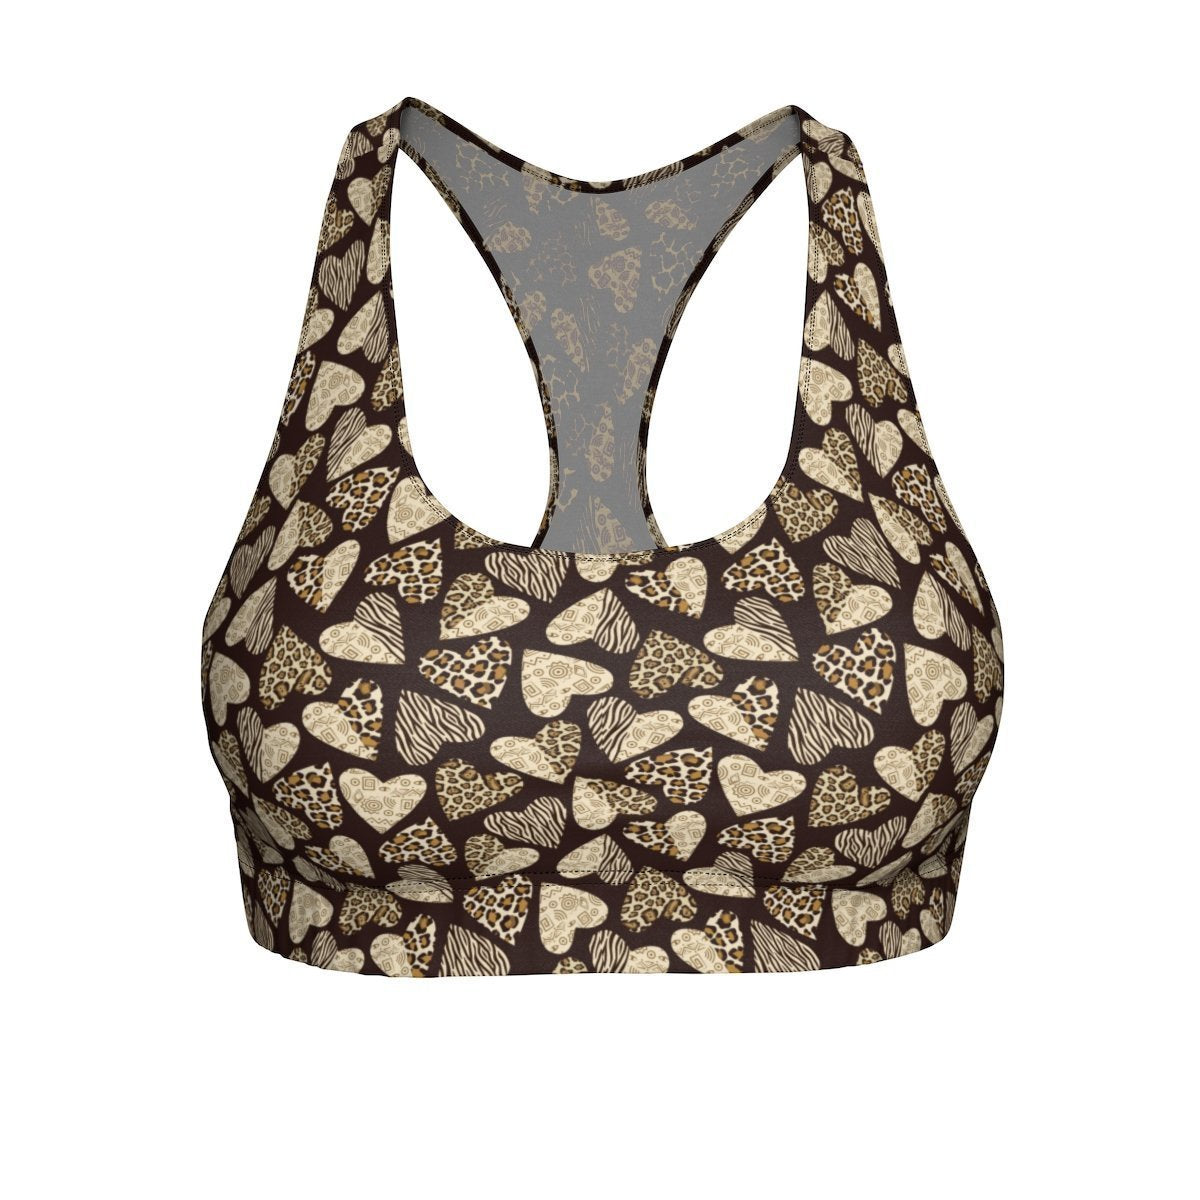 Leopard Print Sports Bras, Cute and Comfortable Sports Bras with a Heart-Shaped Animal Print Pattern